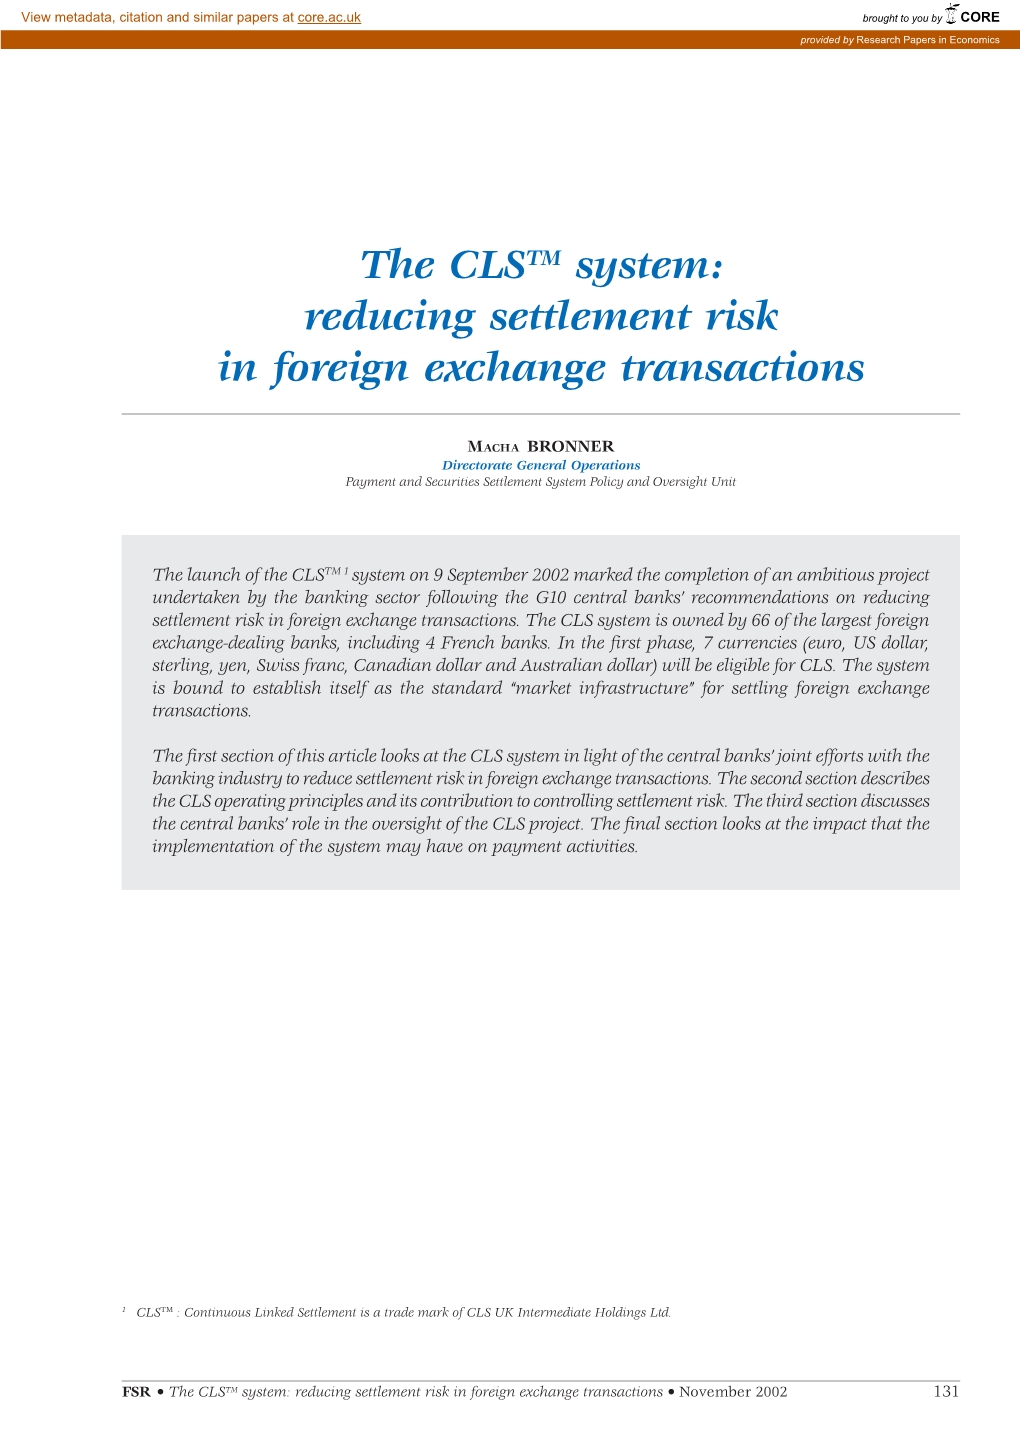 The CLS System: Reducing Settlement Risk in Foreign Exchange Transactions